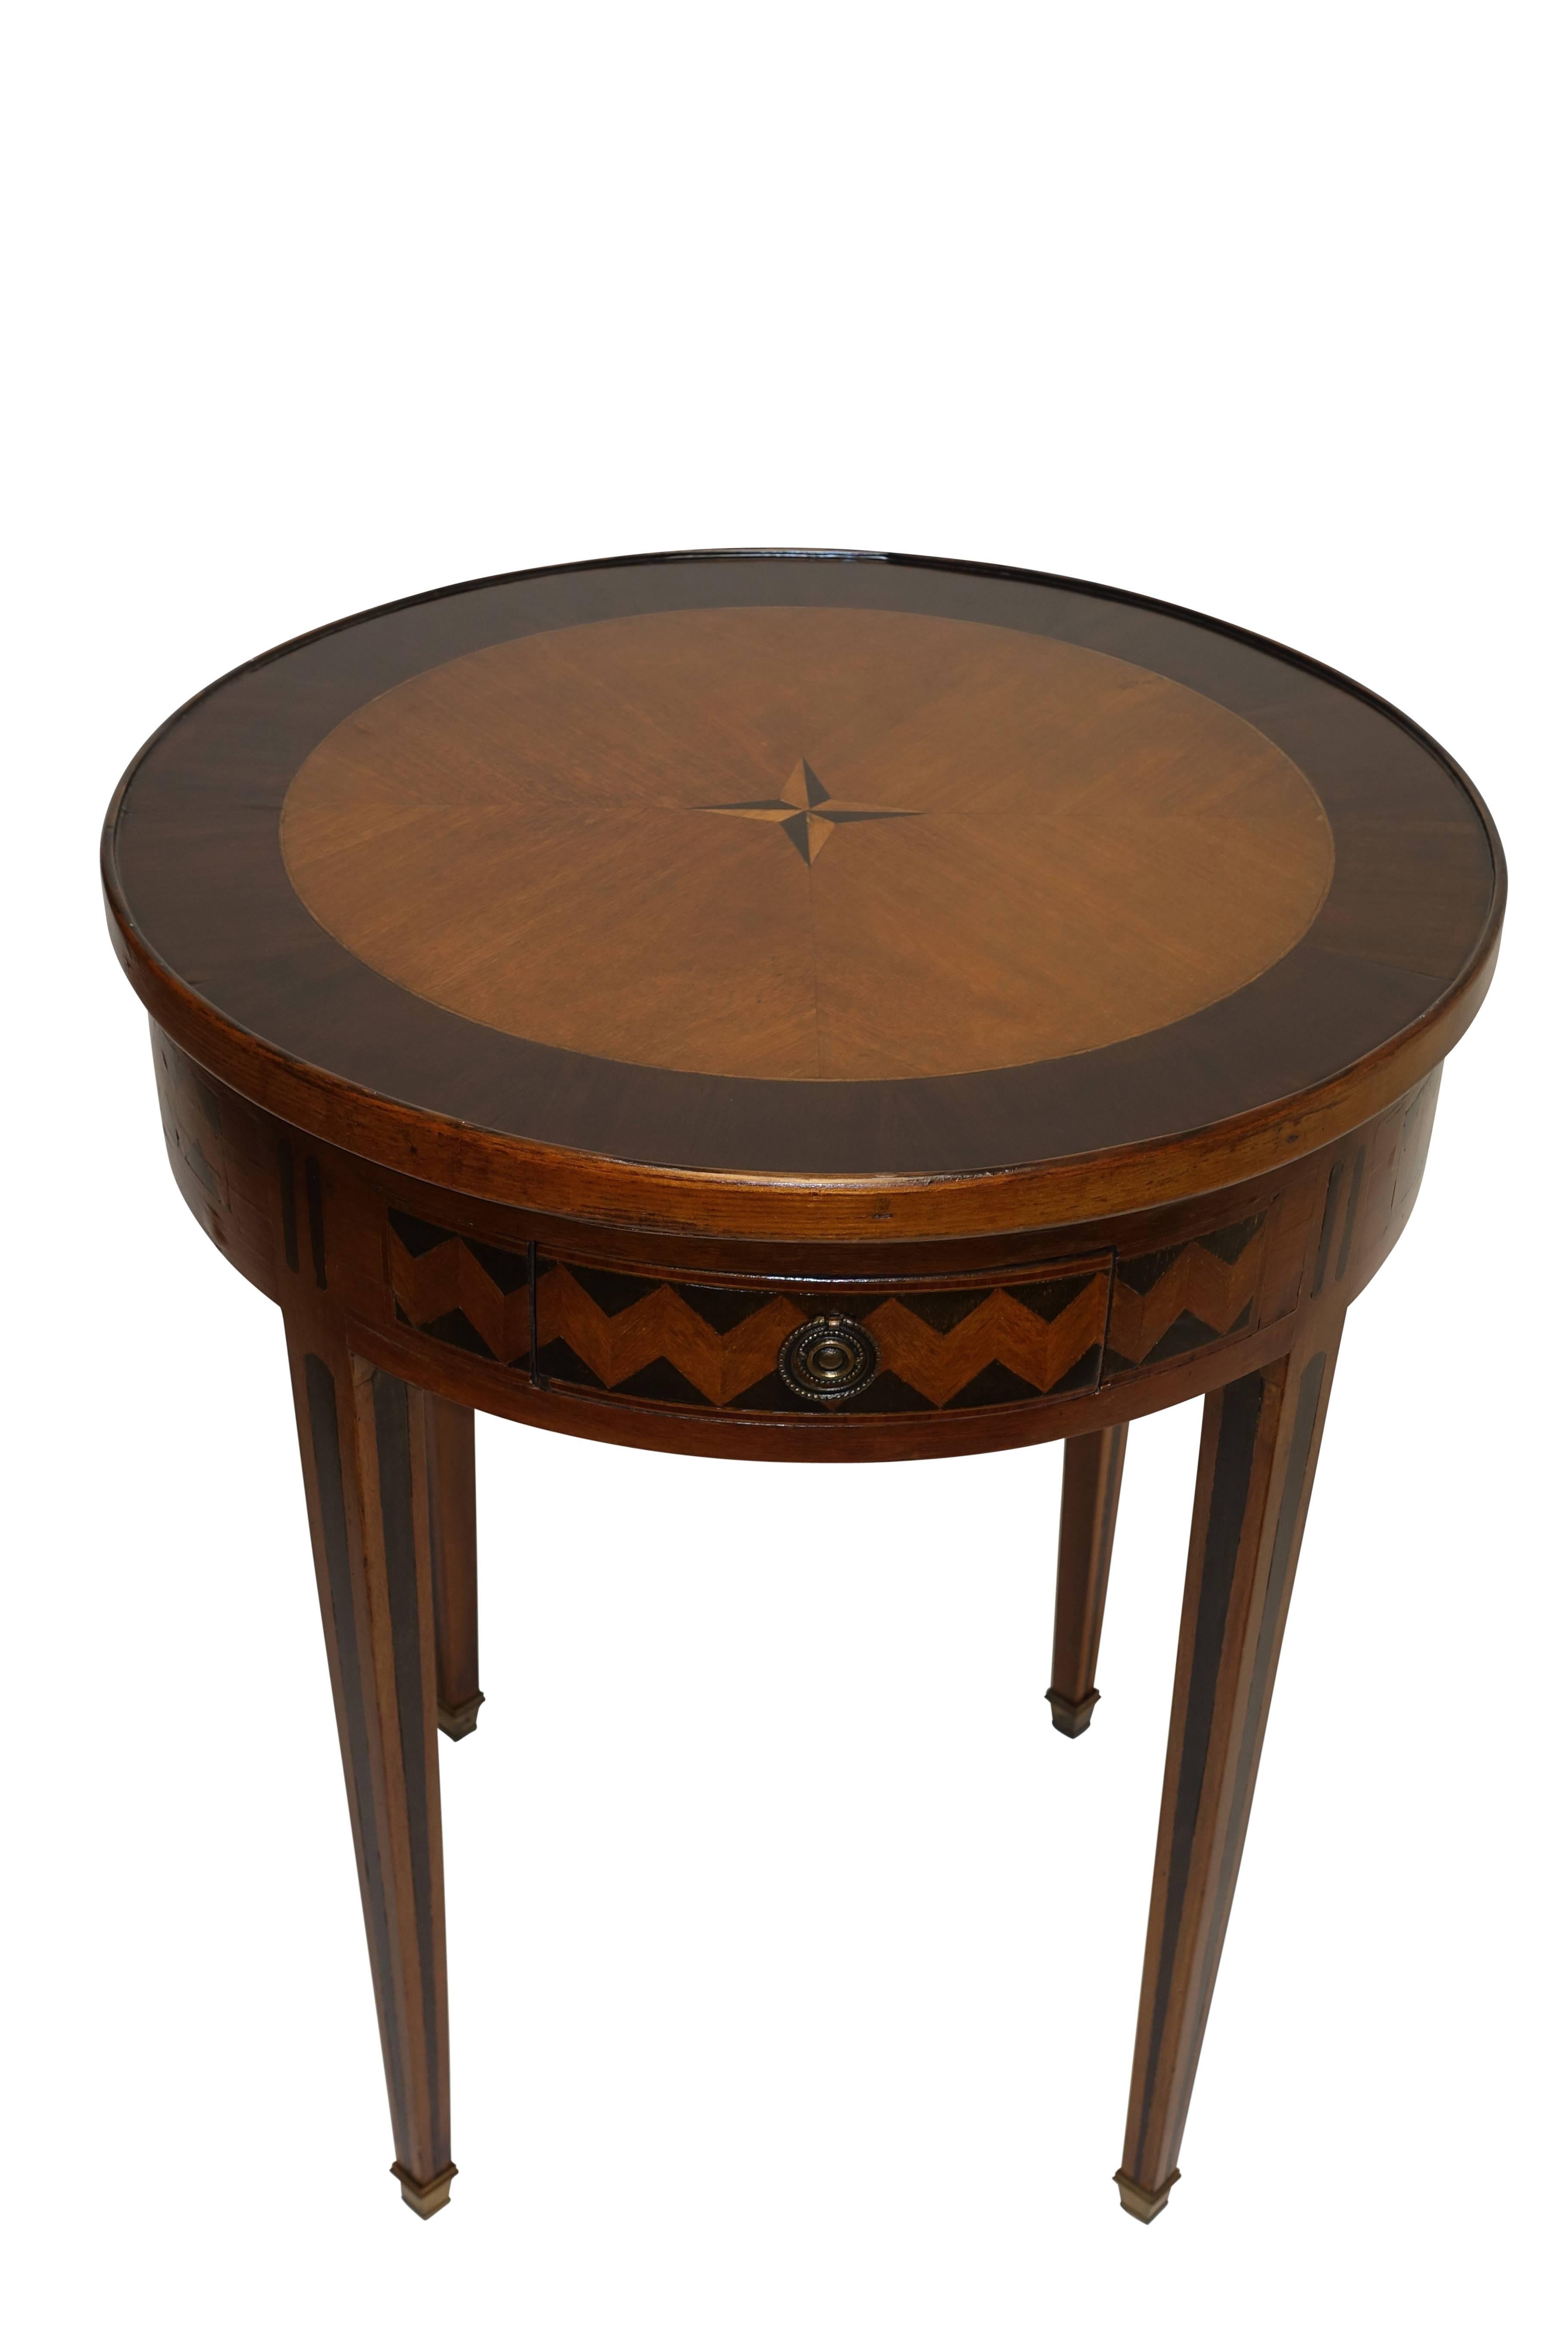 Circular game table inlaid with star design on one side, the reverse side inlaid with a chess board, underneath the two previous tops is a sueded card game surface. Having two short drawers and a pair of candle slides with inset leather tops. The